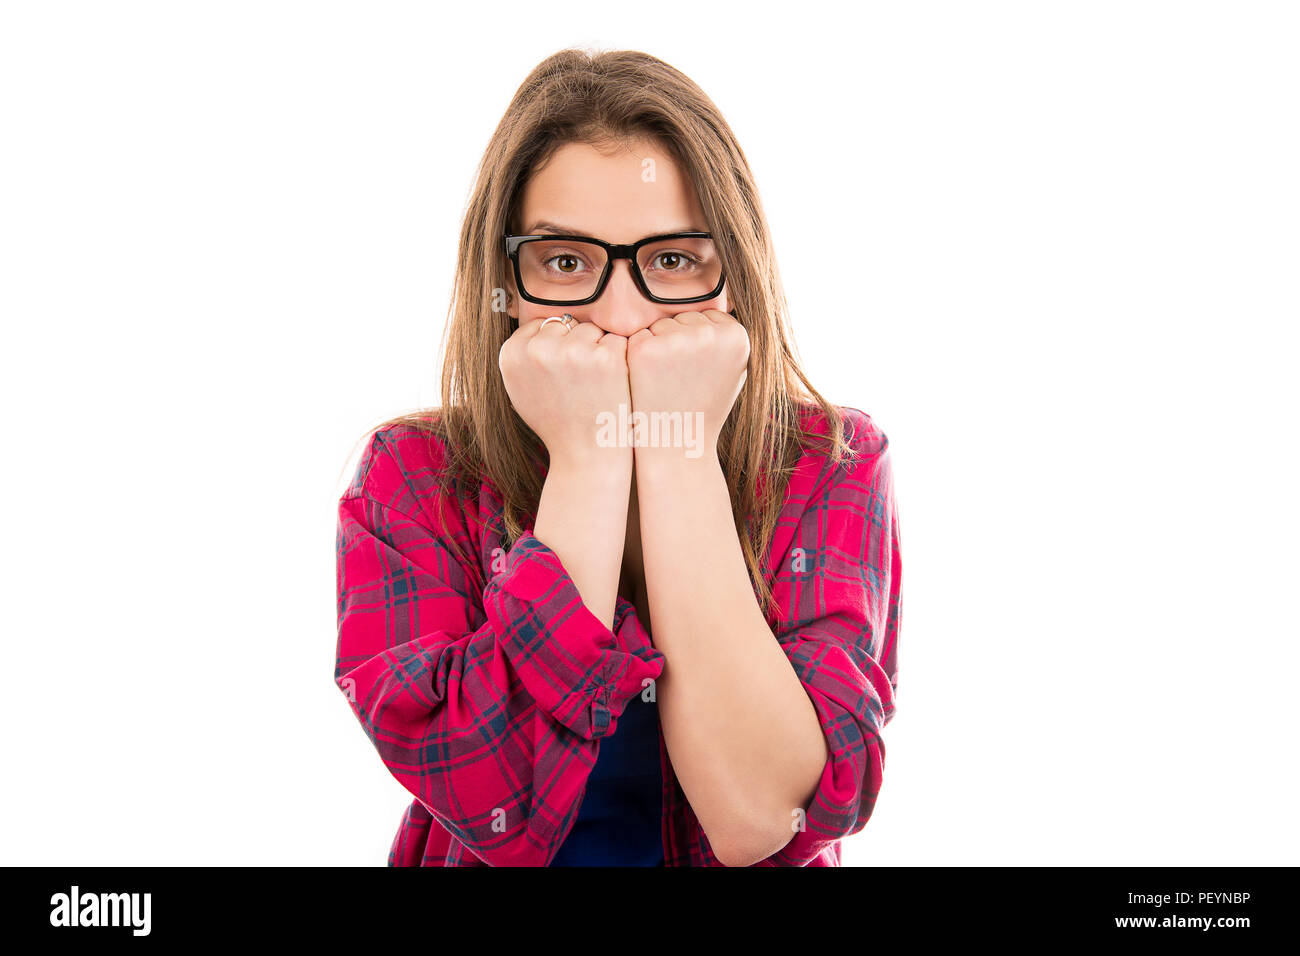 Young woman in glasses and plaid shirt covering mouth in fear and panic looking at camera isolated on white background Stock Photo